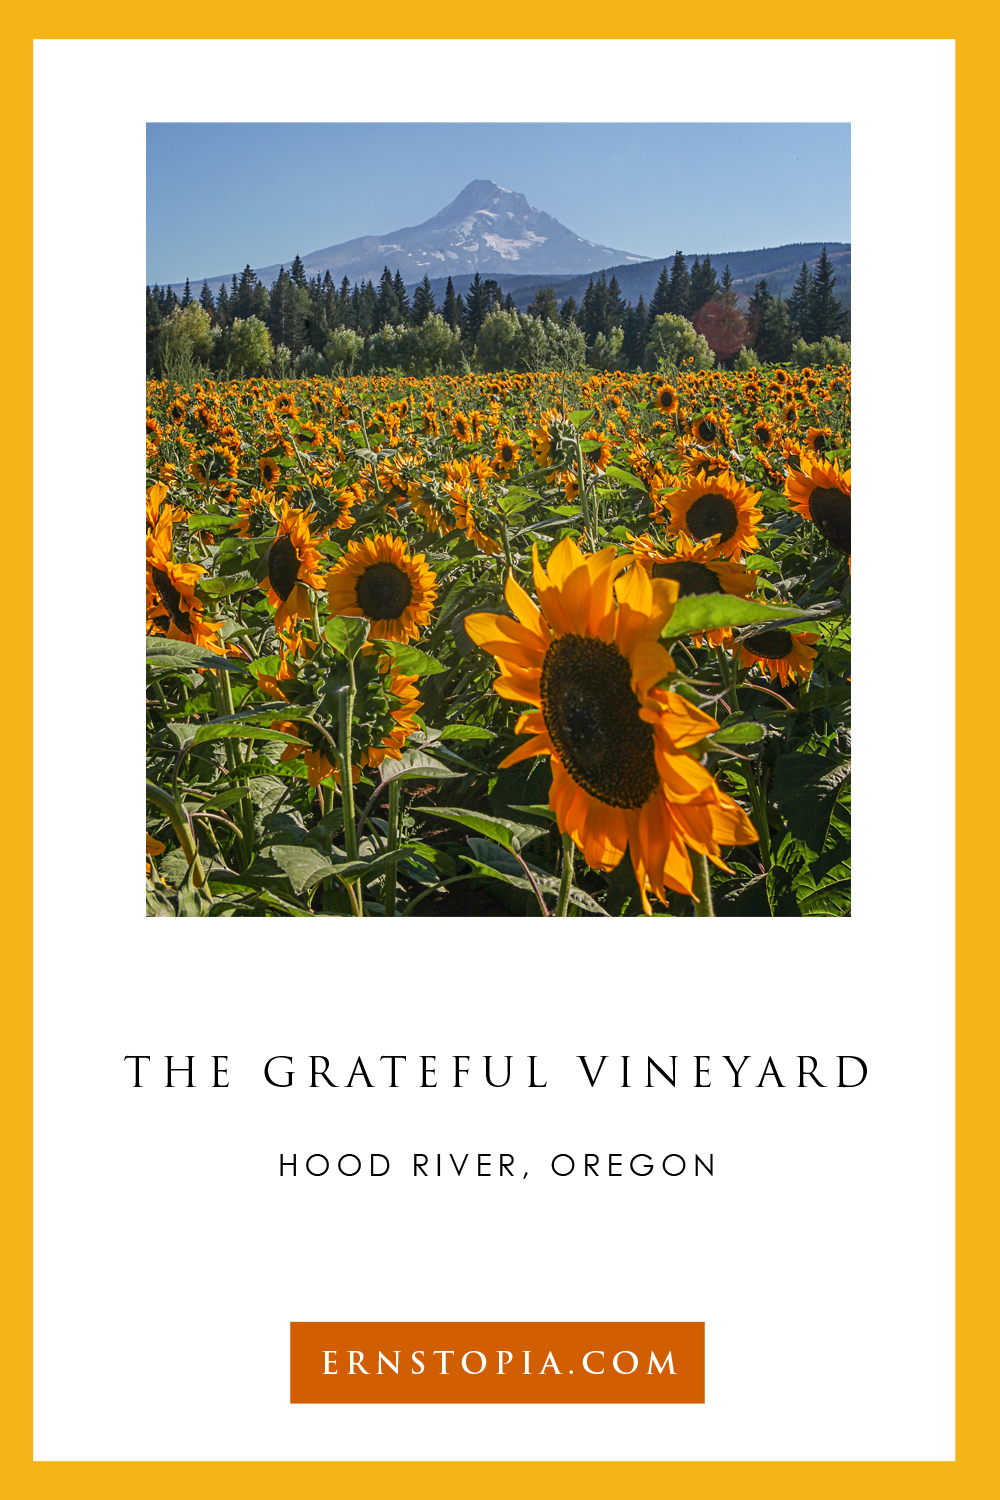 For delicious artisanal Pizza and cider and an amazing view of Mt Hood head over to Hood River and visit The Grateful Vineyard.